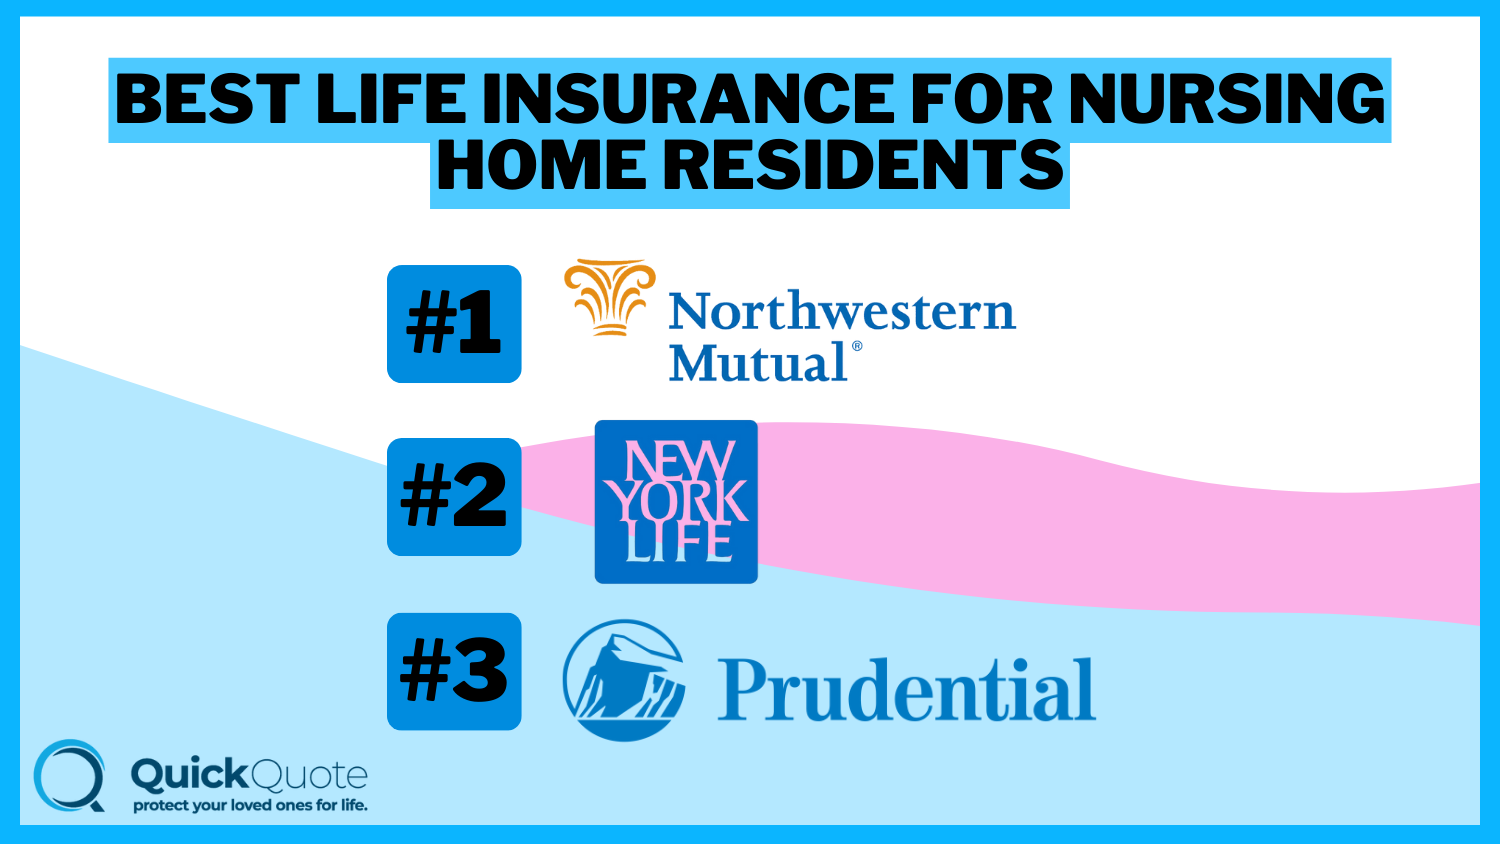 Northwestern Mutual, New York Life, Prudential: Best Life Insurance for Nursing Home Residents